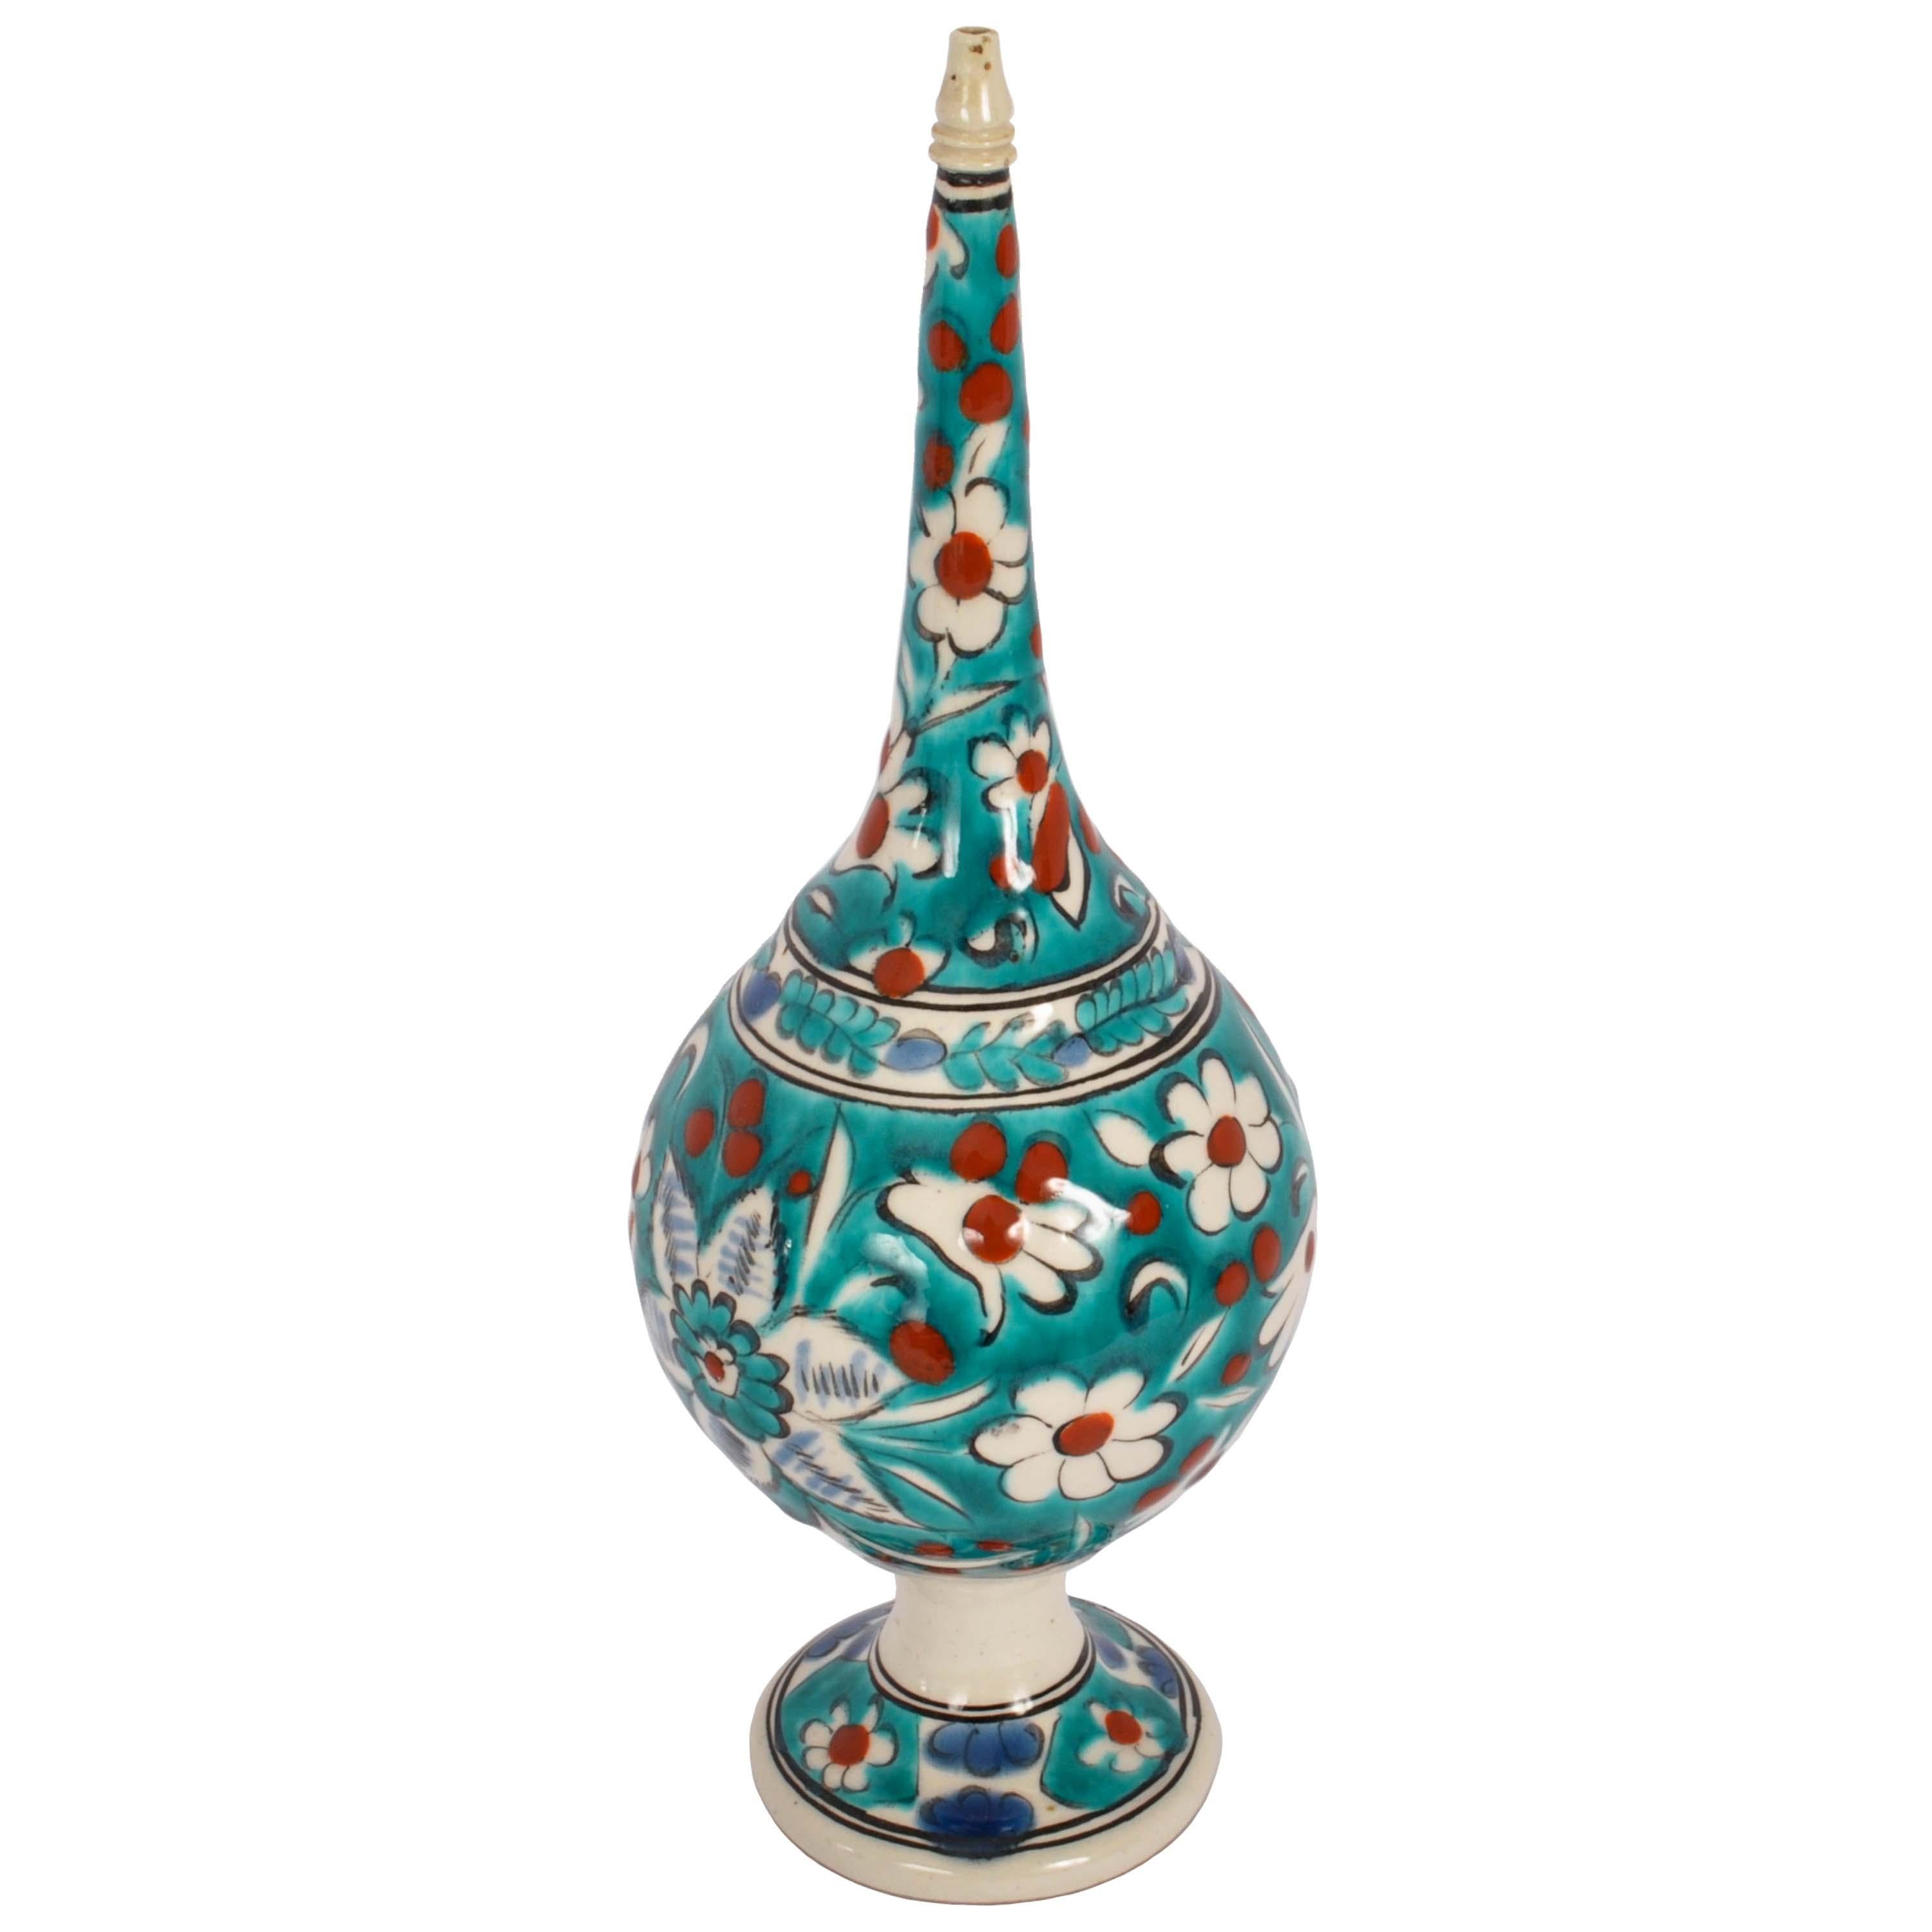 Antique 19th Century Ottoman Islamic Kutahya Pottery Rosewater Dropper, Turkey   In Excellent Condition For Sale In Portland, OR